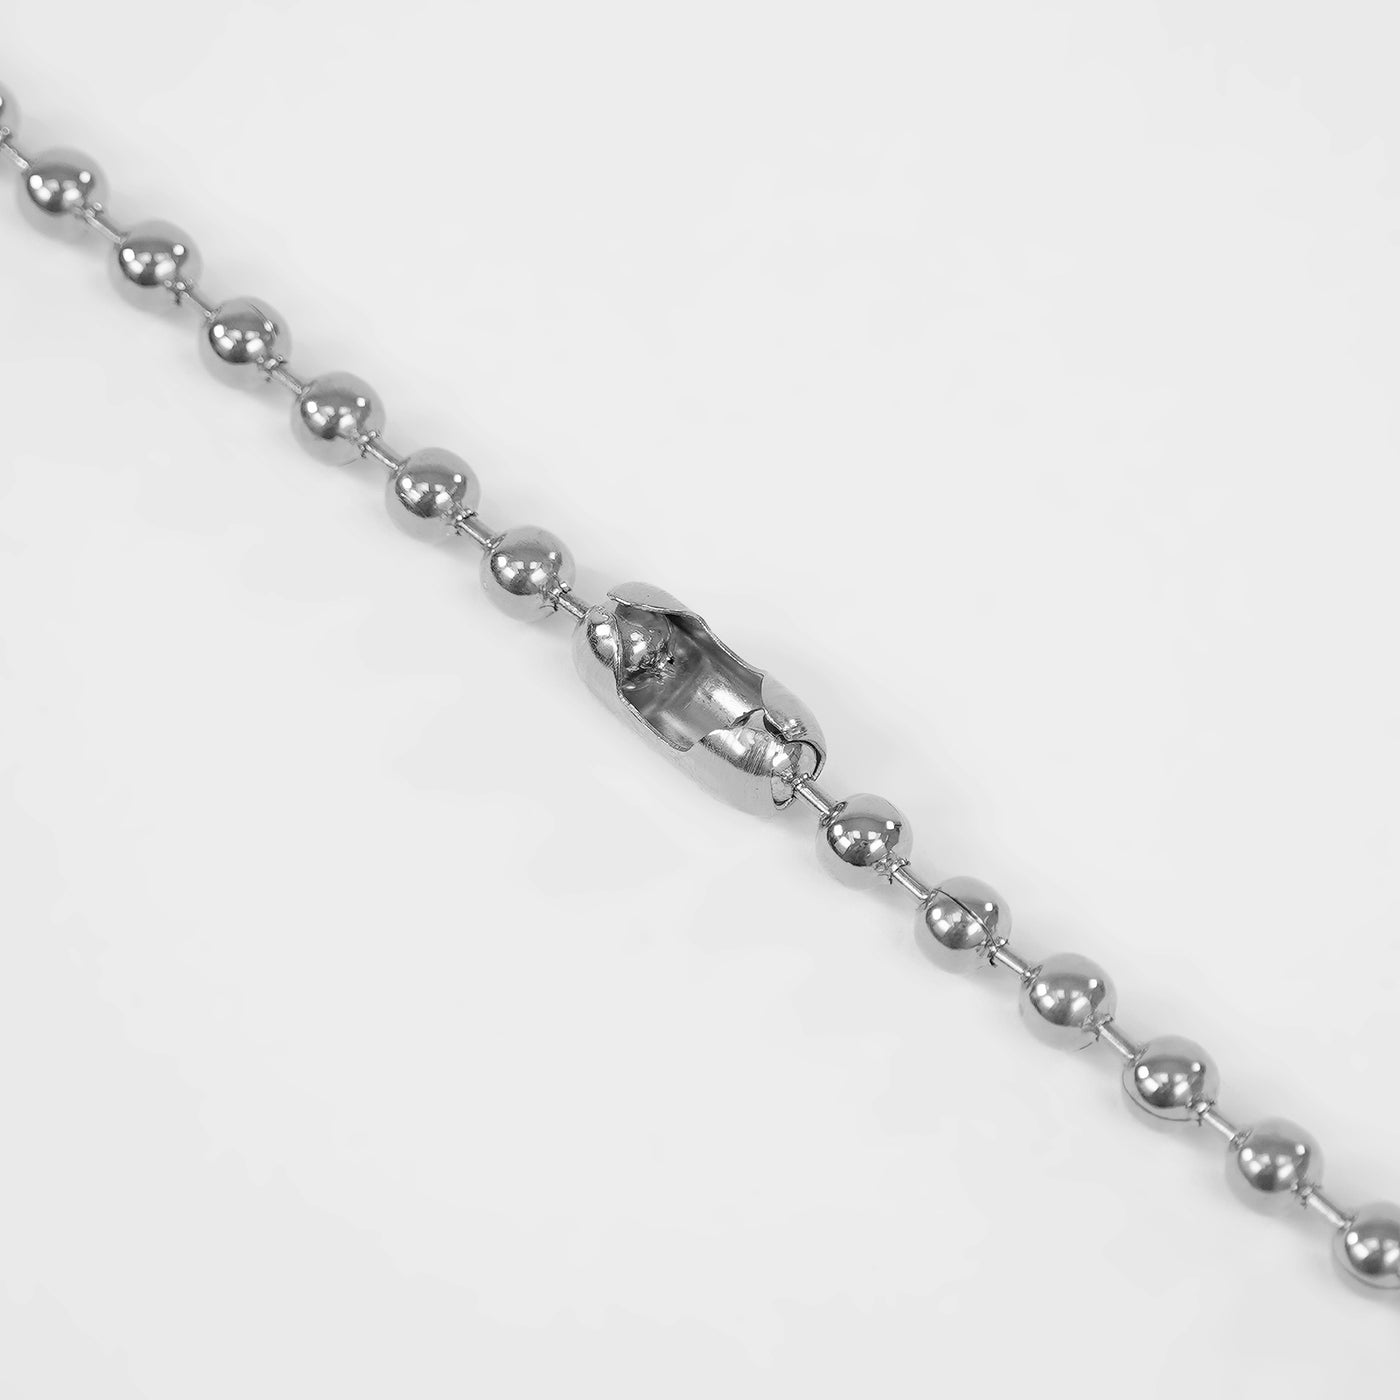 5mm Silver Dog Tag Chain Necklace (29 inches)